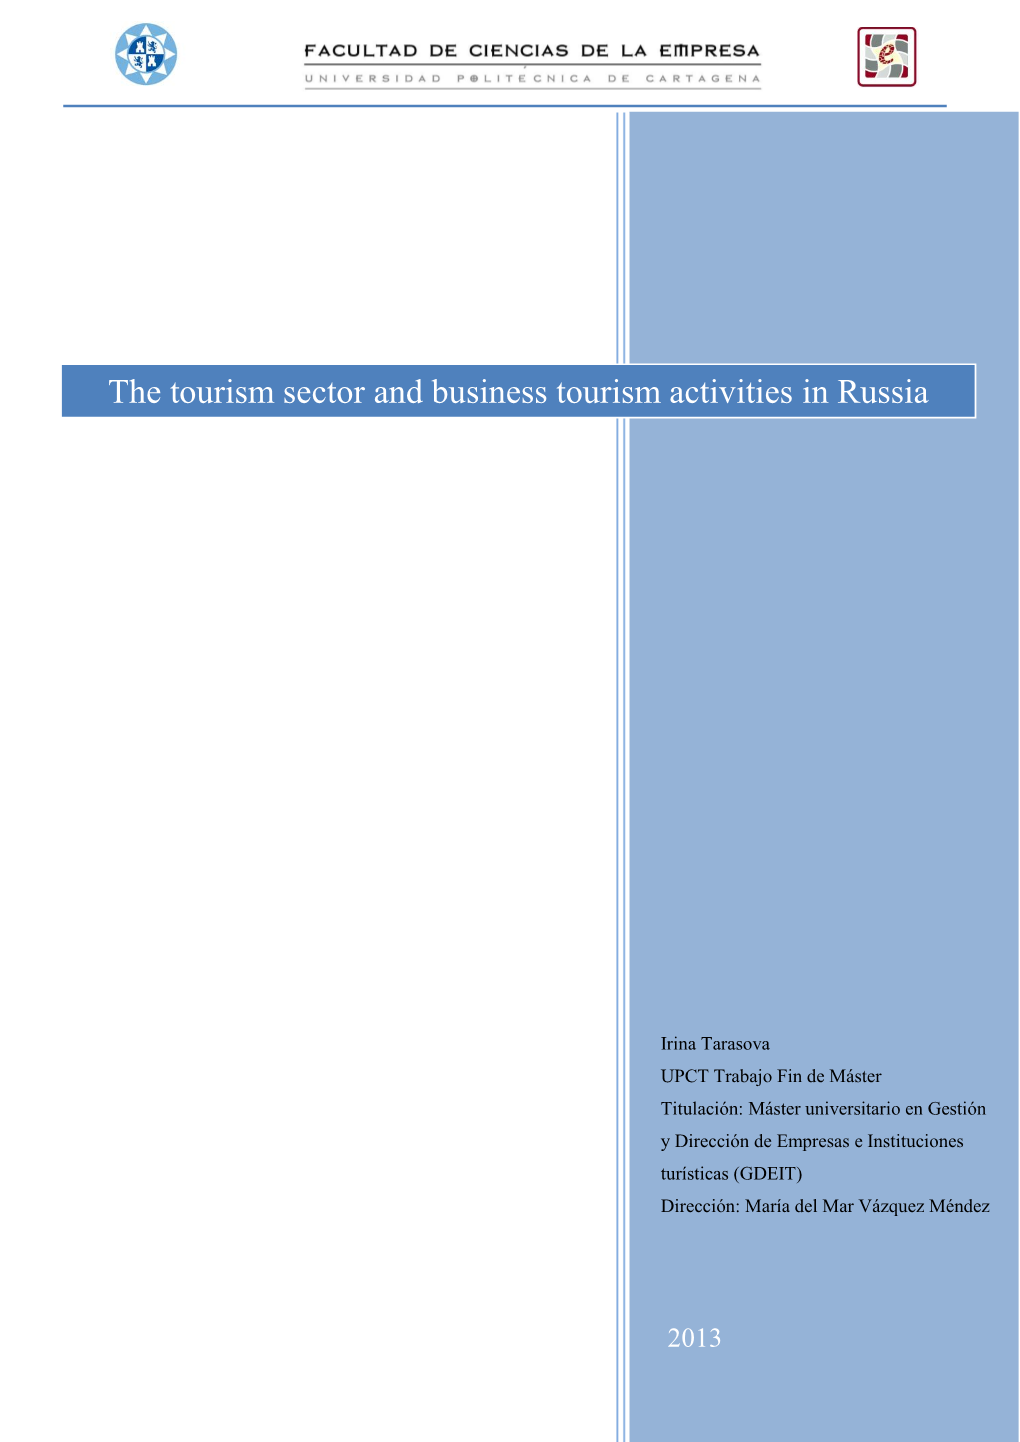 The Tourism Sector and Business Tourism Activities in Russia